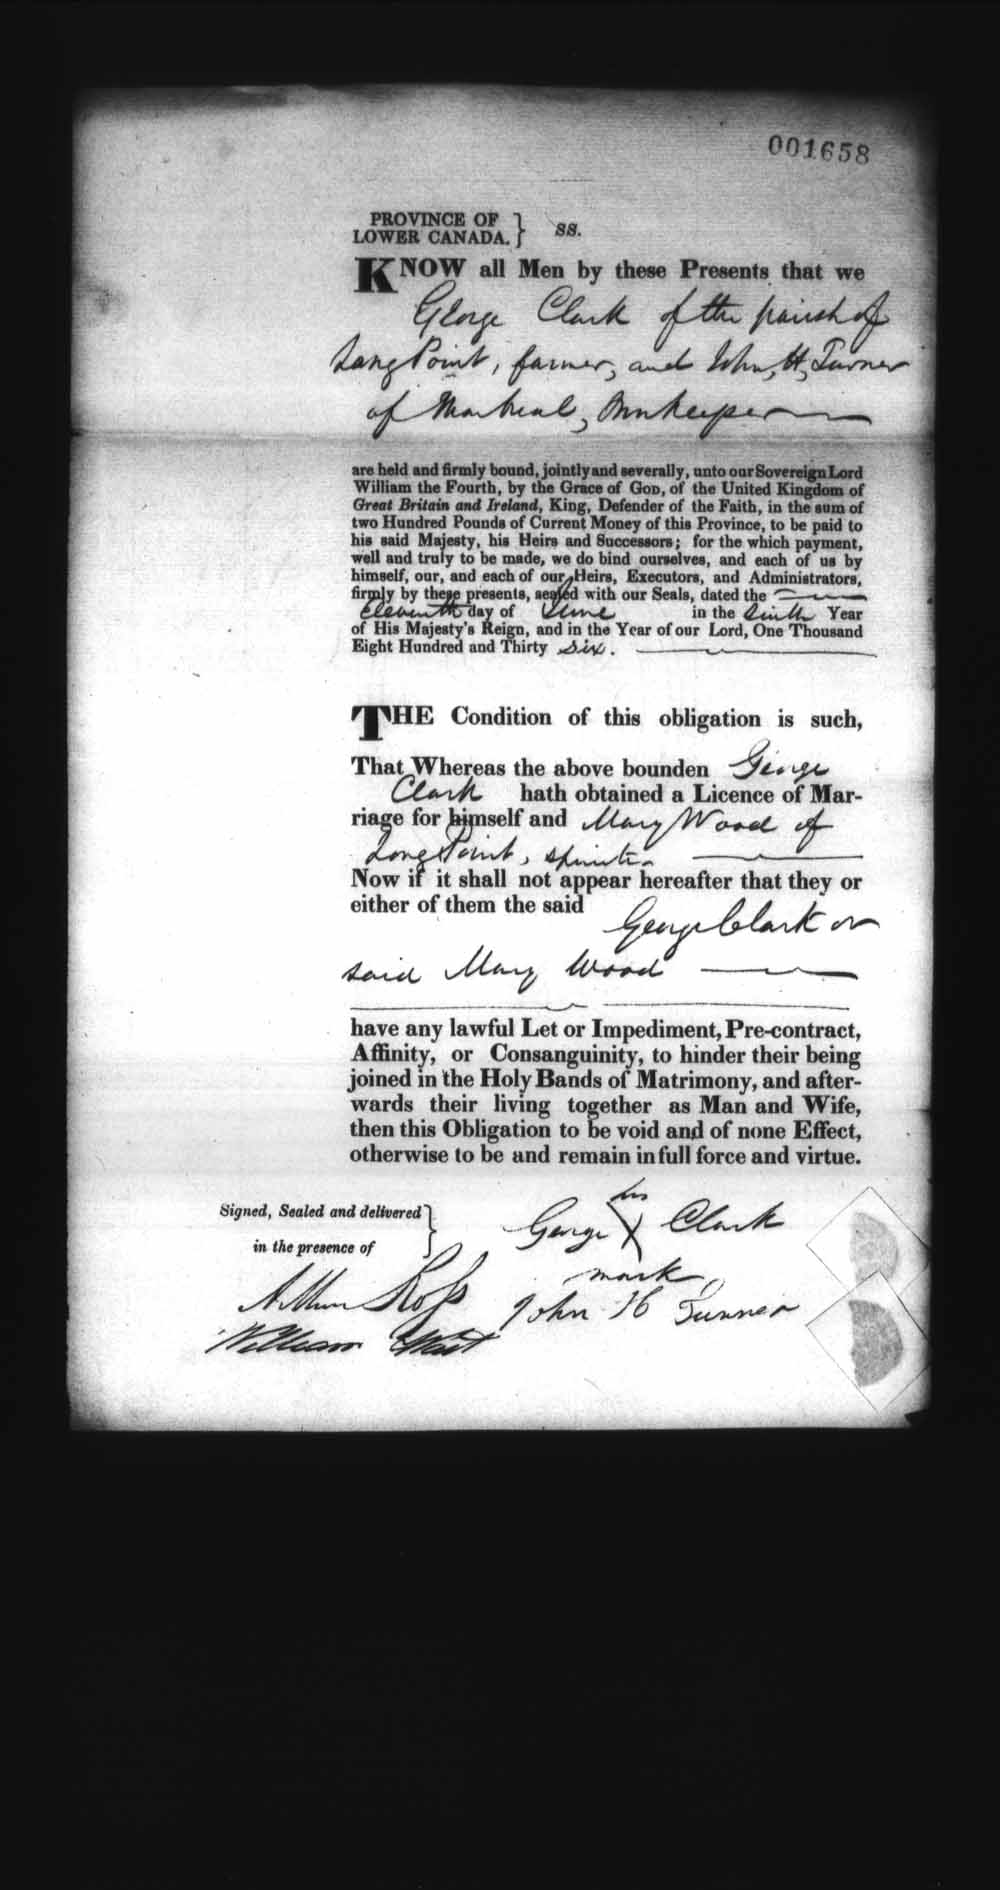 Digitized page of Upper and Lower Canada Marriage Bonds (1779-1865) for Image No.: e008237983